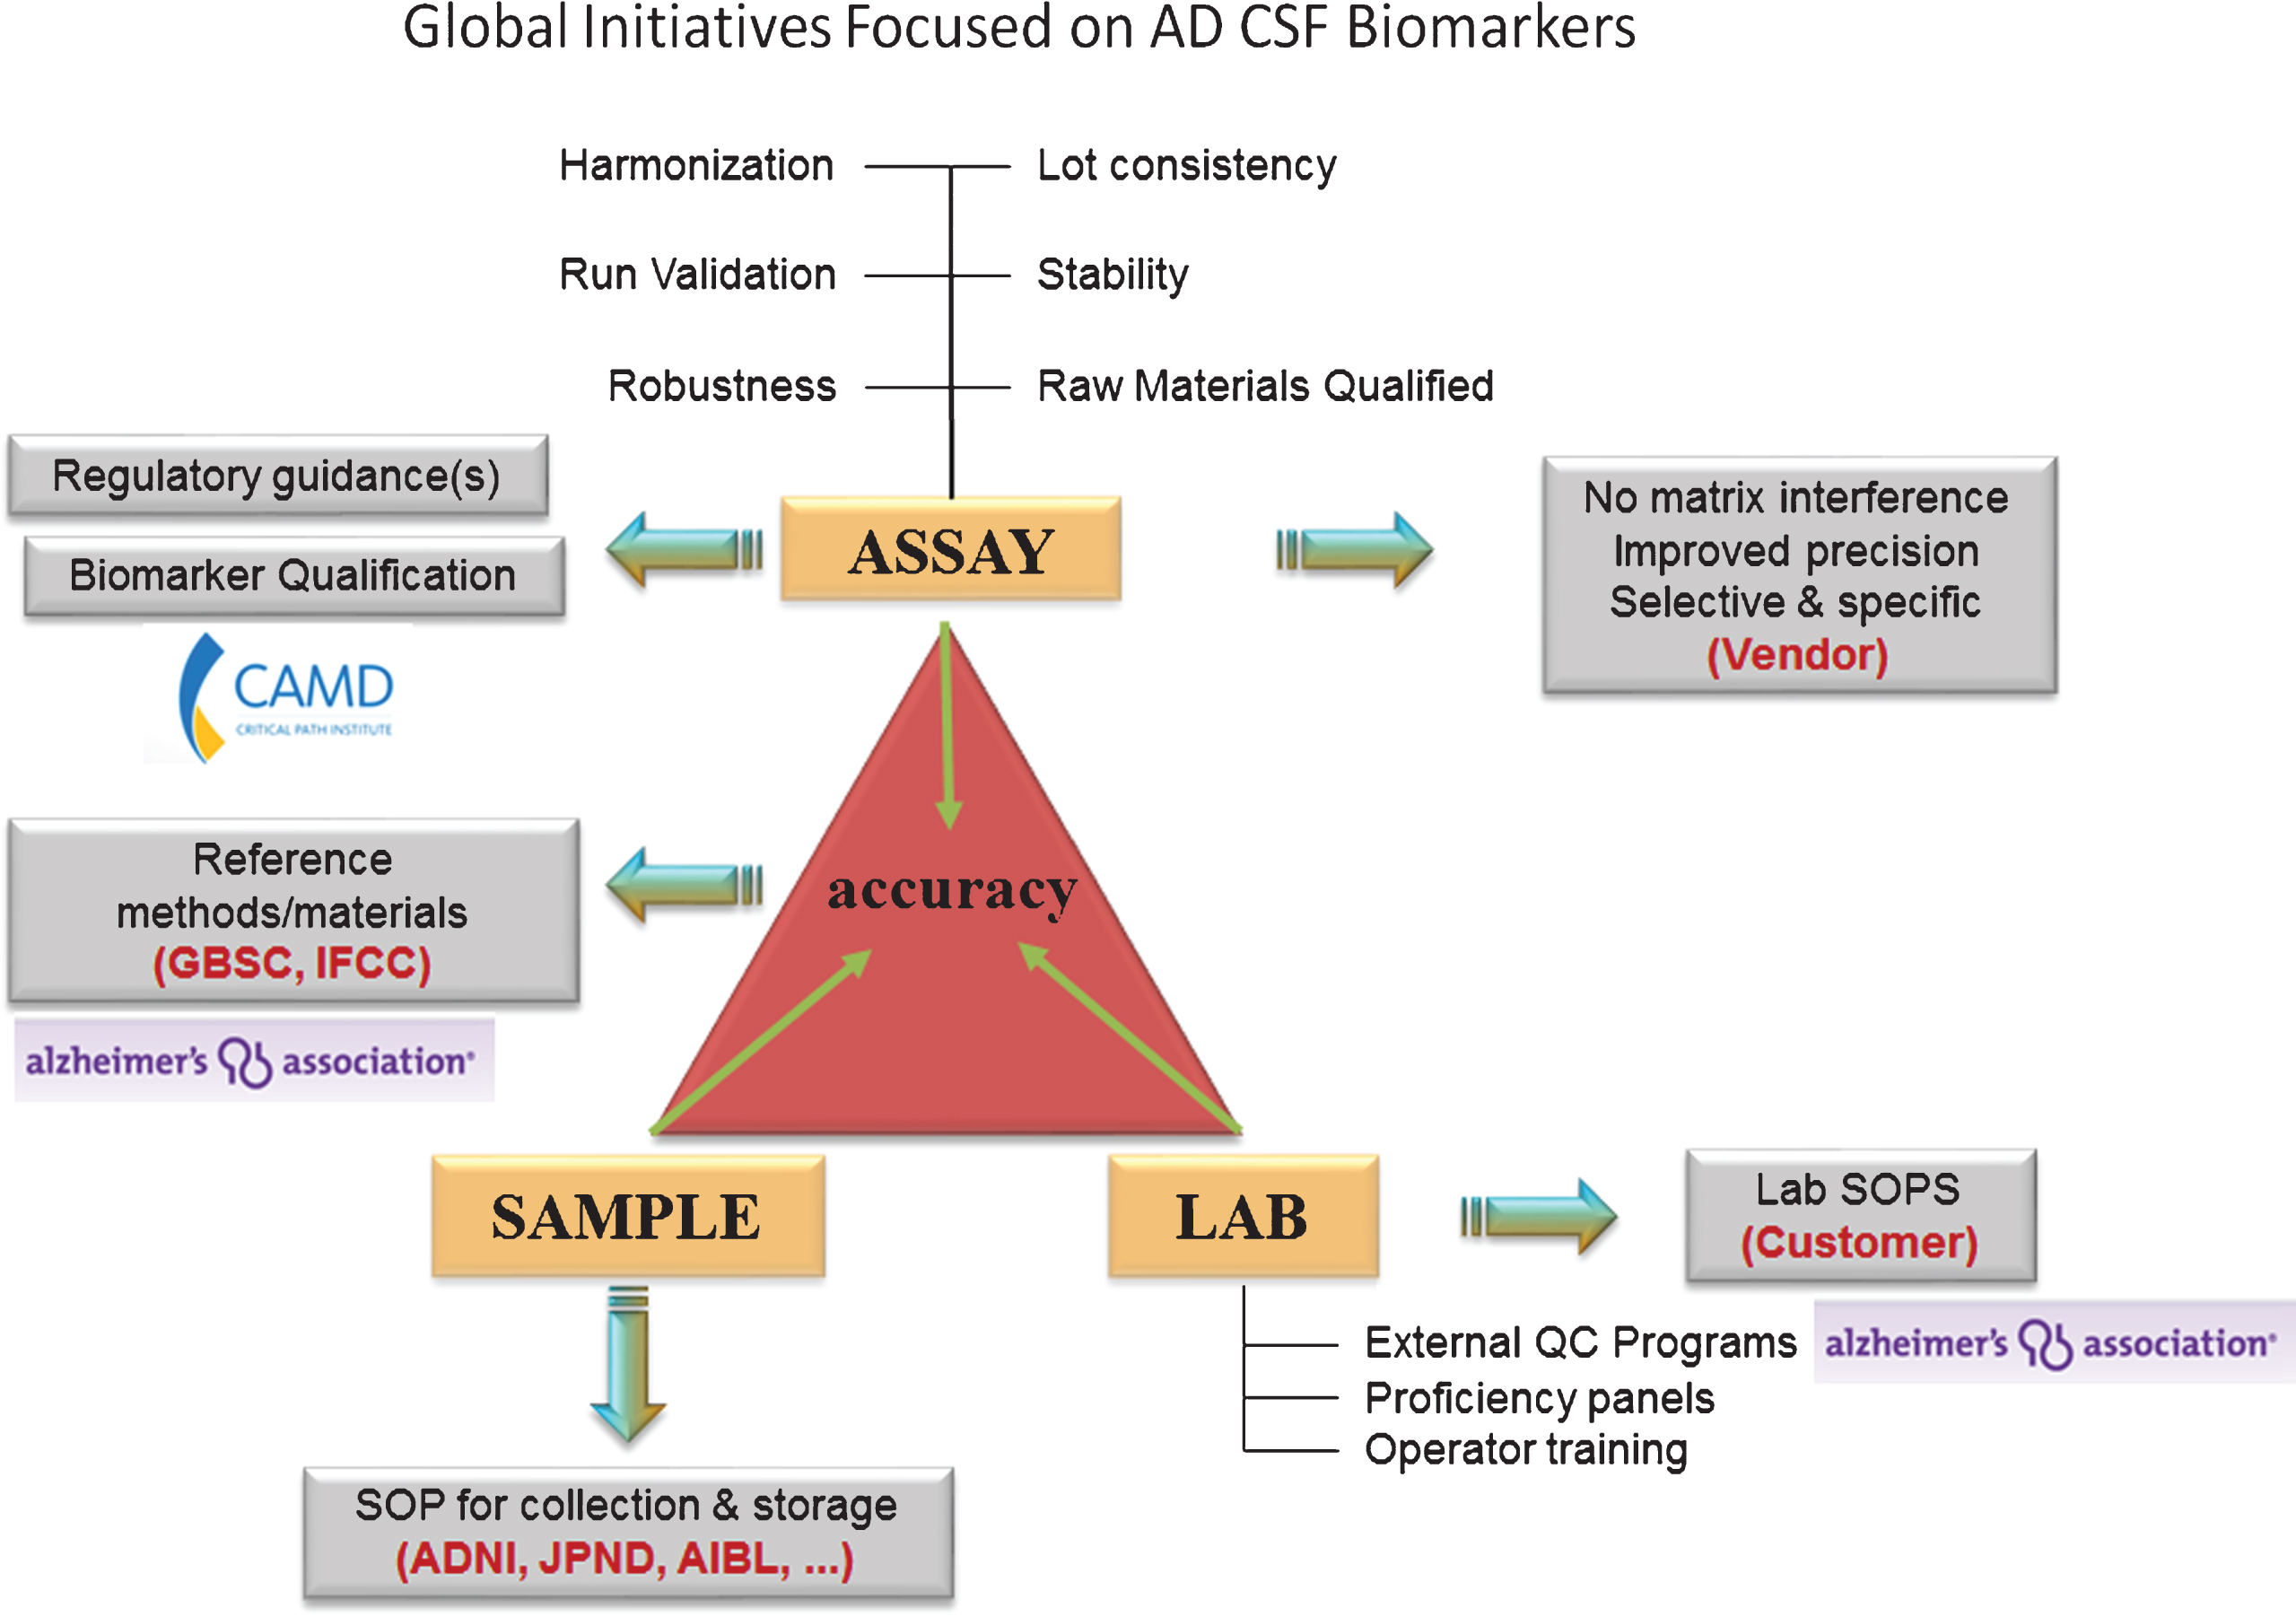 Current global initiatives focused on AD CSF biomarkers. Involvement of worldwide consortia in the standardization of CSF biomarker analysis at the level of the assay, the sample, and the laboratory. Grey box: the need for the future. ADNI, Alzheimer’s disease neuroimaging initiative; AIBL, The Australian Imaging, Biomarker & Lifestyle Flagship Study of Ageing; CAMD, Coalition Against Major Diseases; GBSC, Global Biomarker Standardization Initiative; IFCC, International Federation of Clinical Chemistry; JPND, EU Joint Programme - Neurodegenerative Disease Research (JPND); QC, quality control; SOP, standard operating procedure.